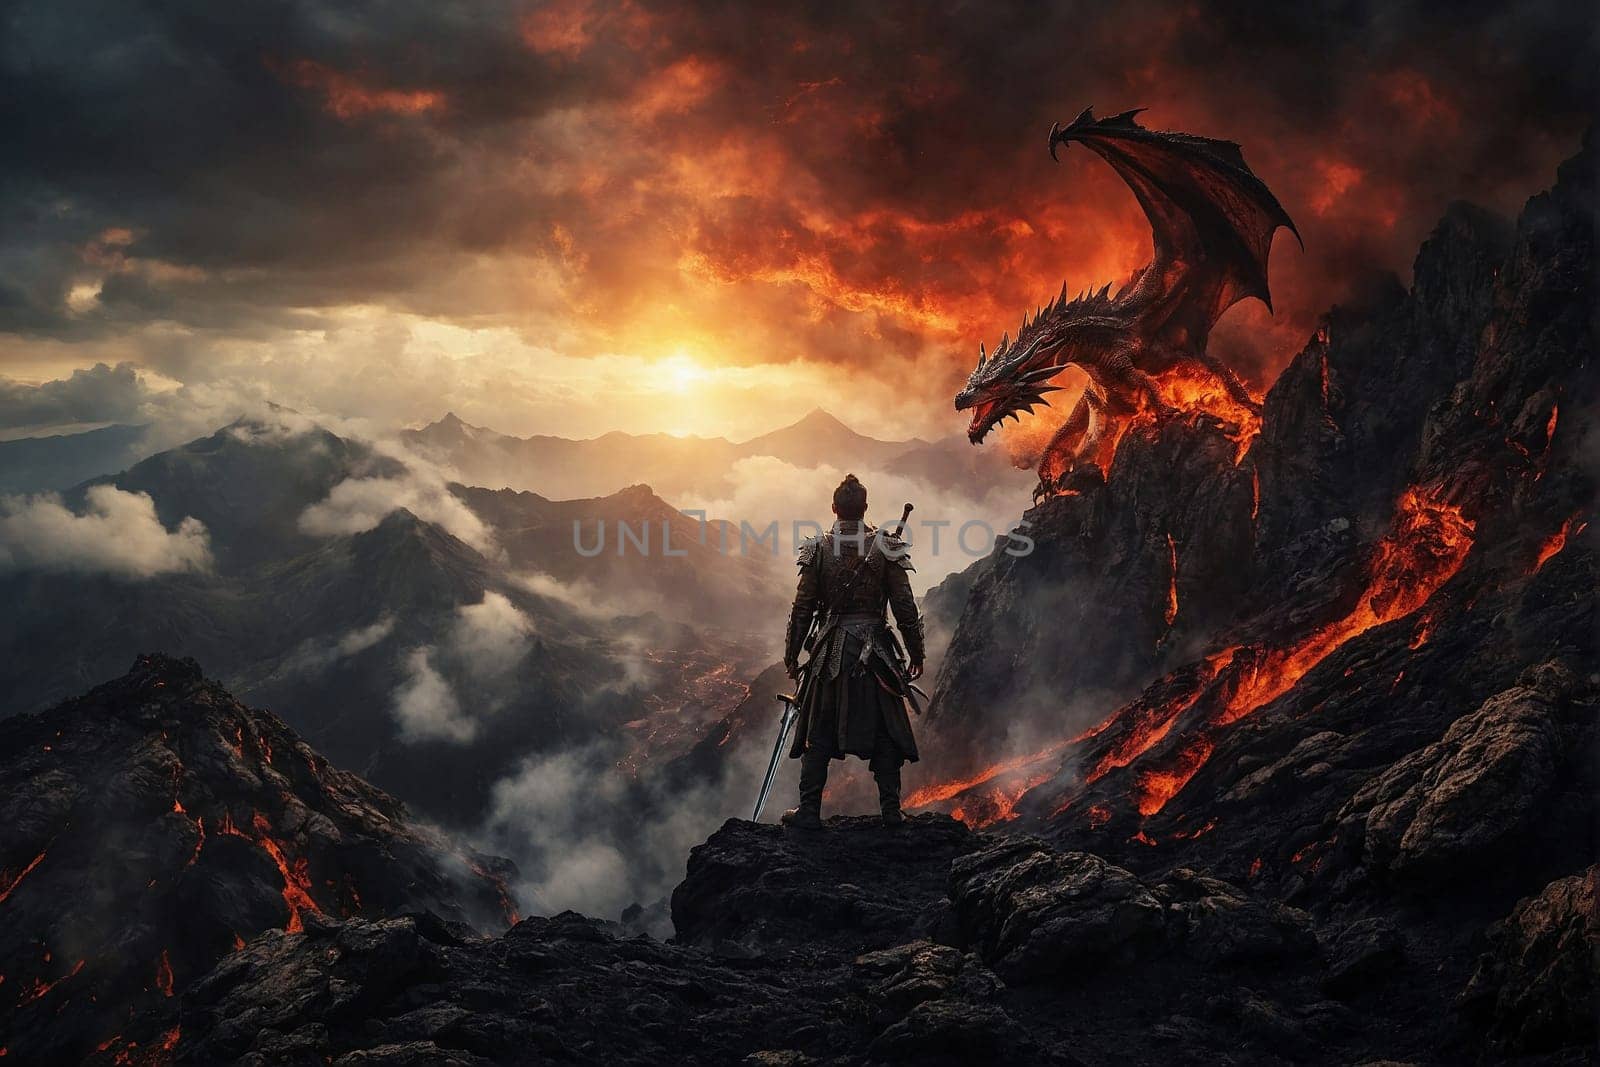 A man stands confidently on a mountain peak, next to a majestic dragon, showcasing their epic alliance.